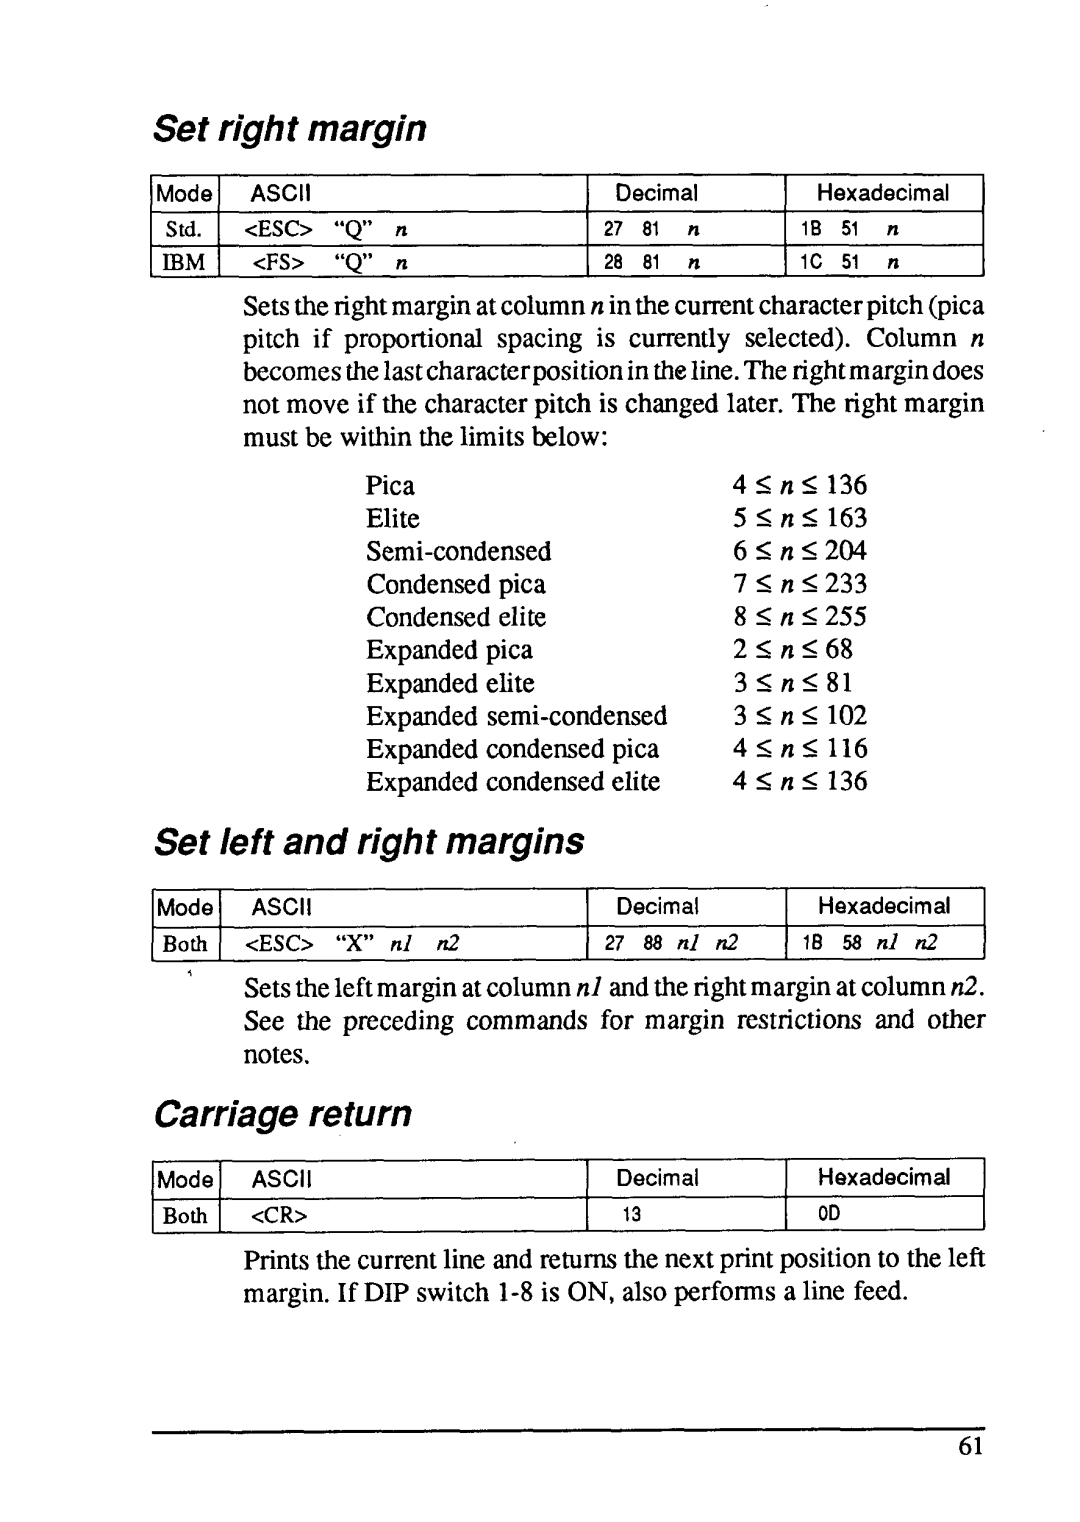 Star Micronics LC24-15 user manual Set right margin, Set left and right margins, Carriage return 